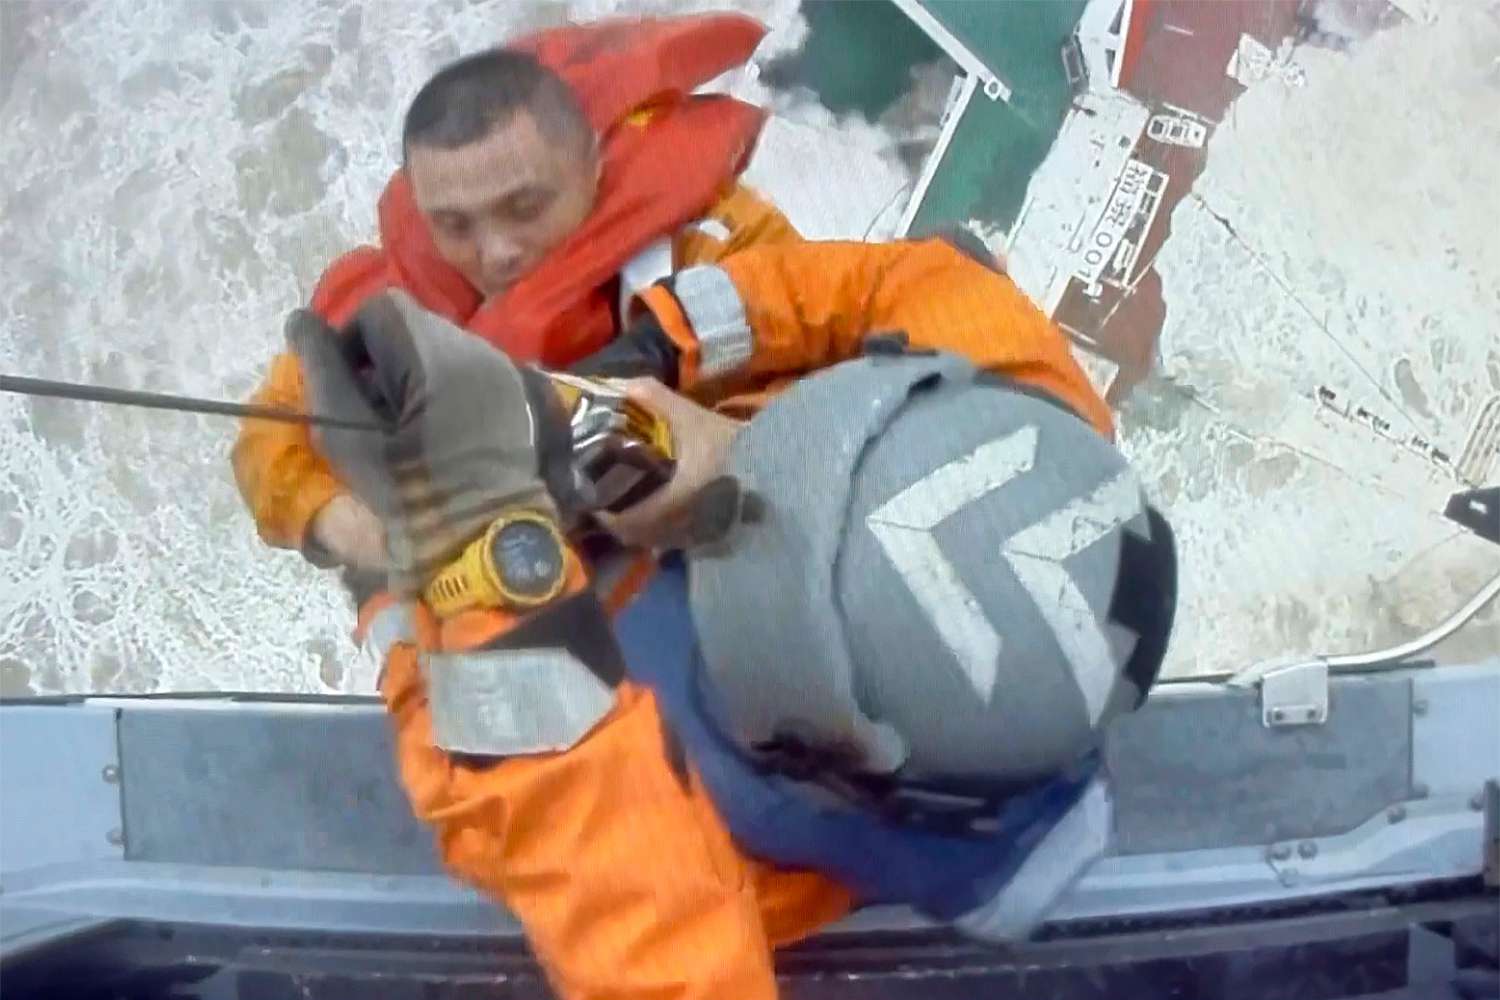 In this image released by Hong Kong Government Flying Service, helicopter crew members winch up a man from a sinking ship in the South China Sea, 300 kilometers (186 miles) south of Hong Kong, il sabato, luglio 2, 2022, as Typhoon Chaba was moving in the area. The industrial support ship operating in the South China Sea has sunk with the possible loss of more than two dozen crew members, rescue services in Hong Kong said Saturday.